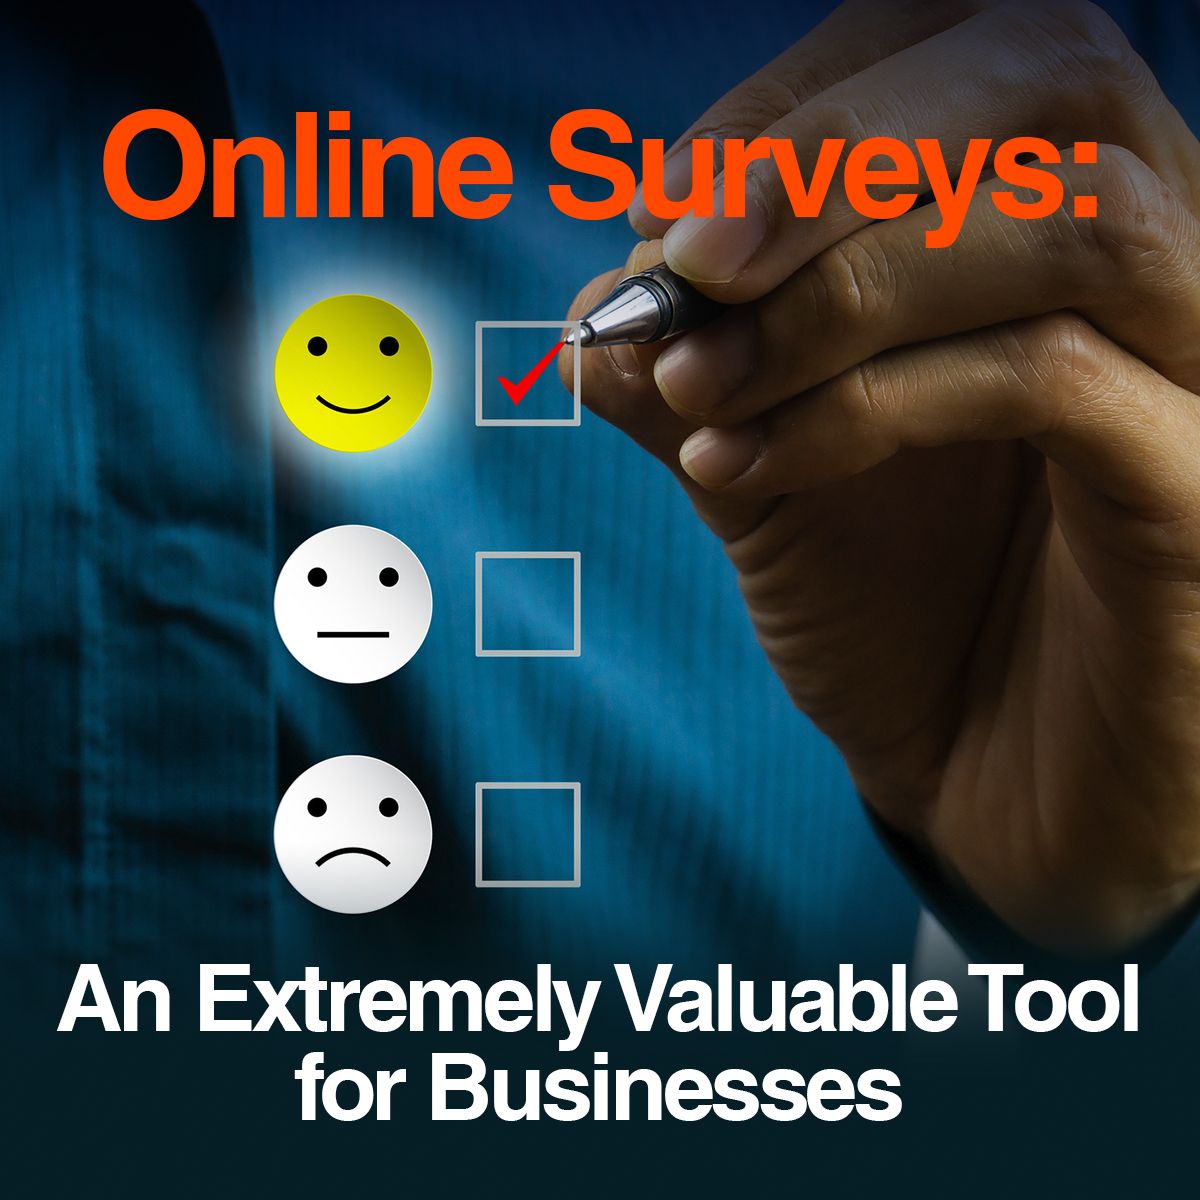 Online Surveys Are an Extremely Valuable Tool for Businesses of All Sizes